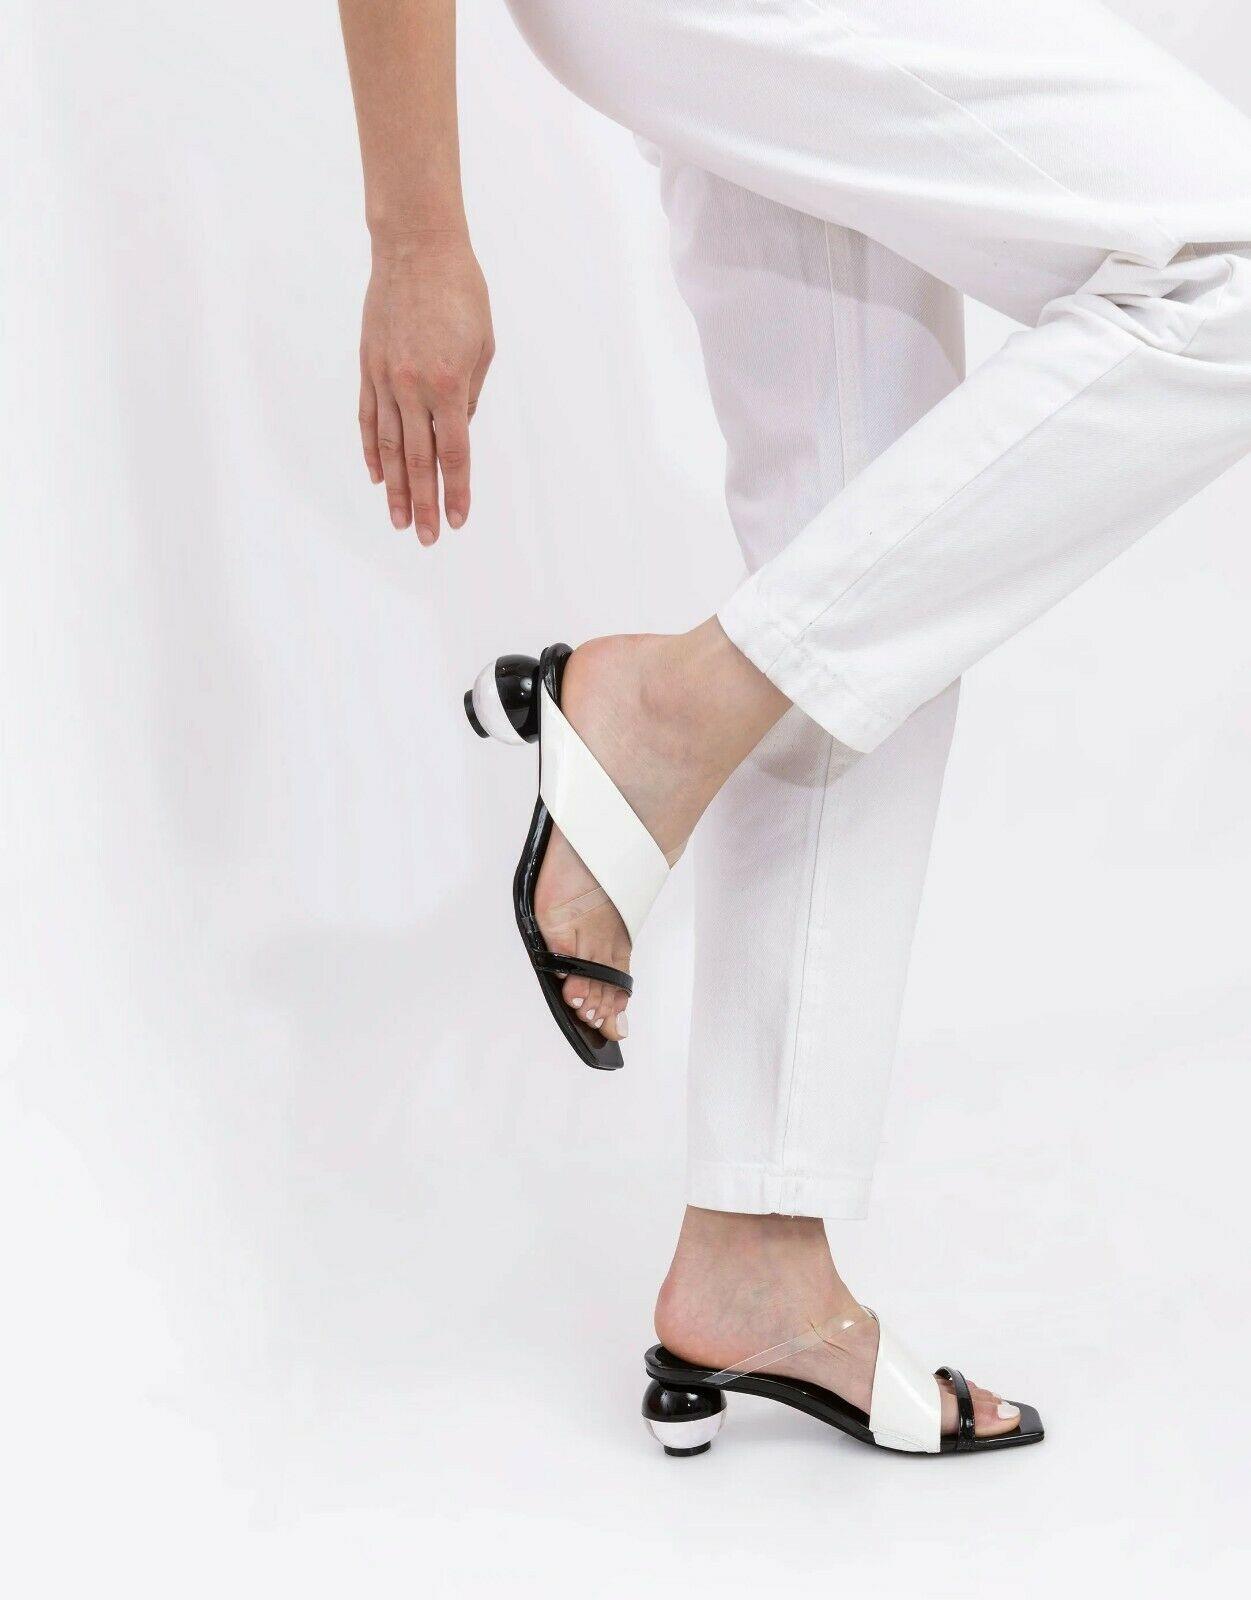 Jeffrey Campbell Lateral Ball Heel Slide Sandal In Black White Patent Leather Size 8 - SVNYFancy